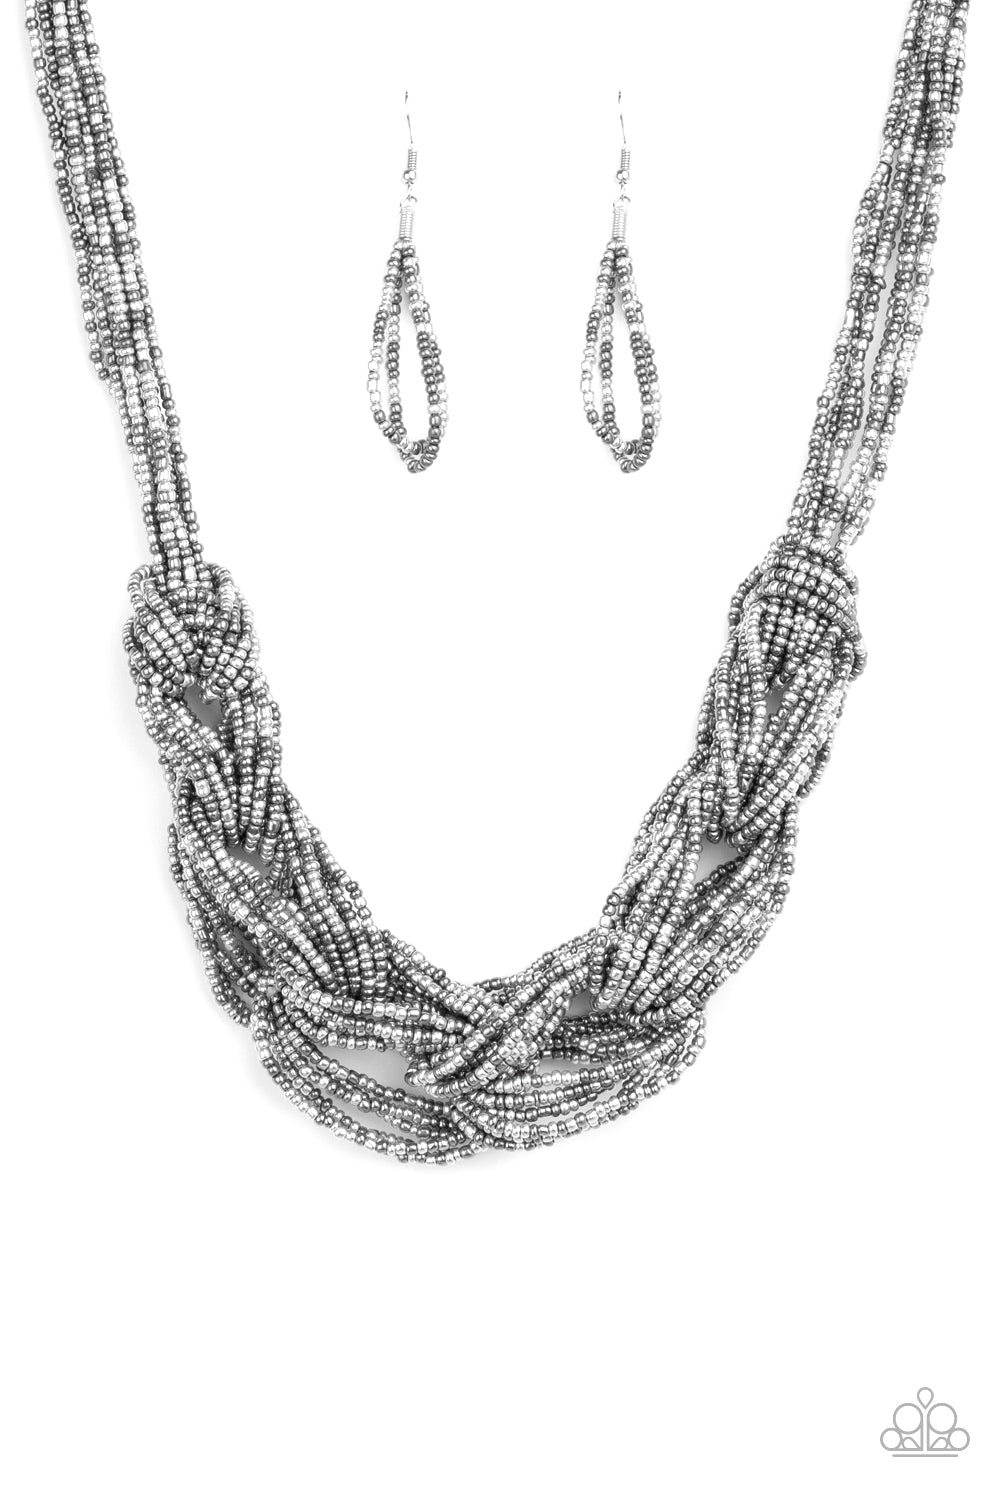 Paparazzi Accessories - City Catwalk - Silver Necklace - Alies Bling Bar